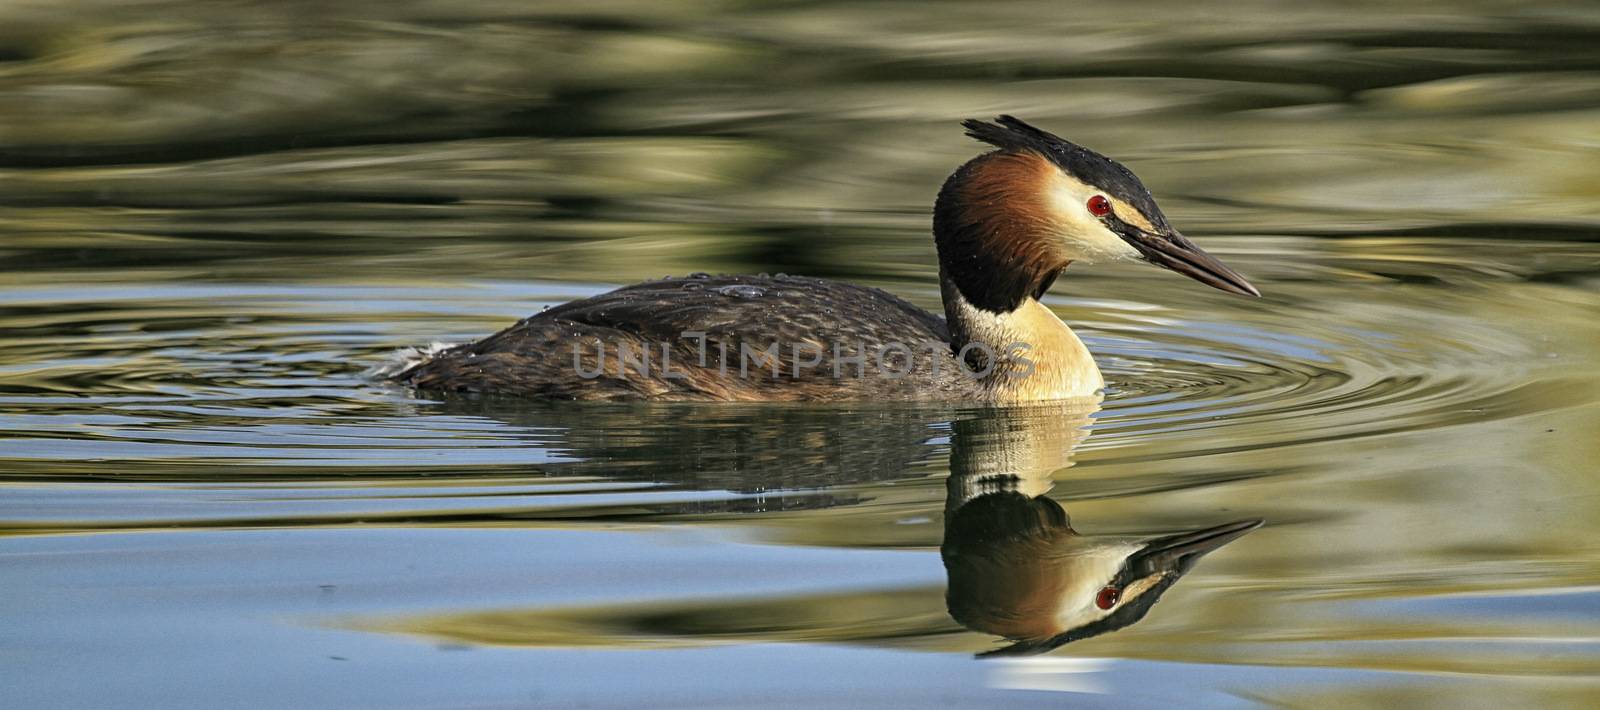 magnificent great crested grebe by mariephotos